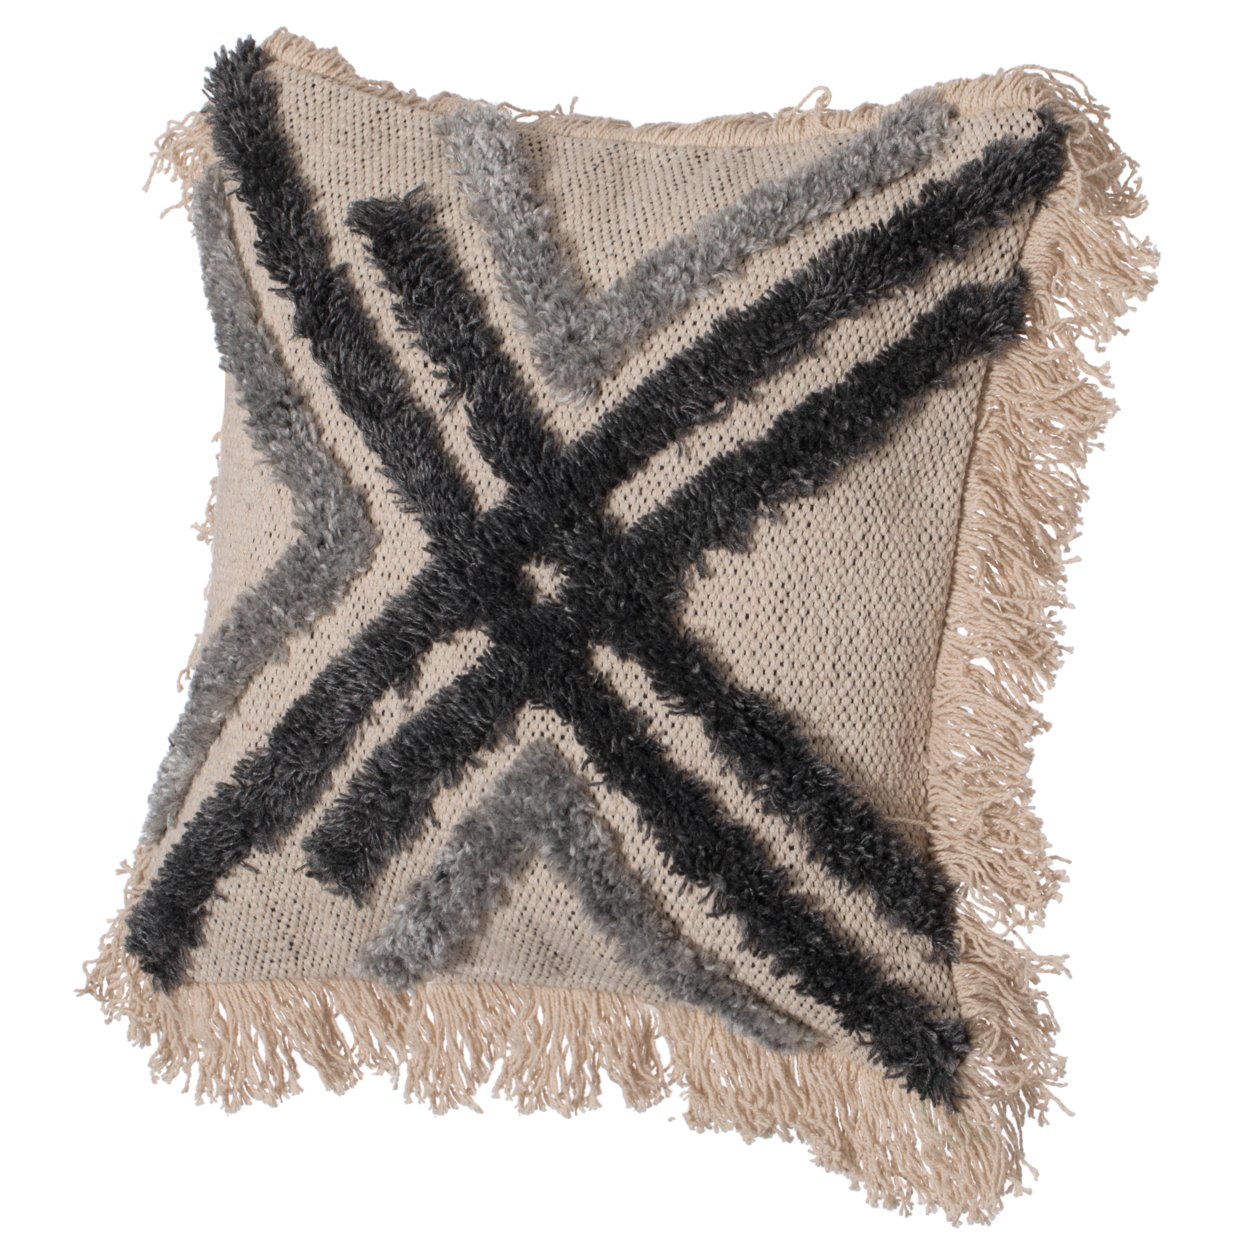 16" Handwoven Cotton & Silk Throw Fringed Pillow Cover Embossed Zig Zag & Crossed Lines Design - crossed